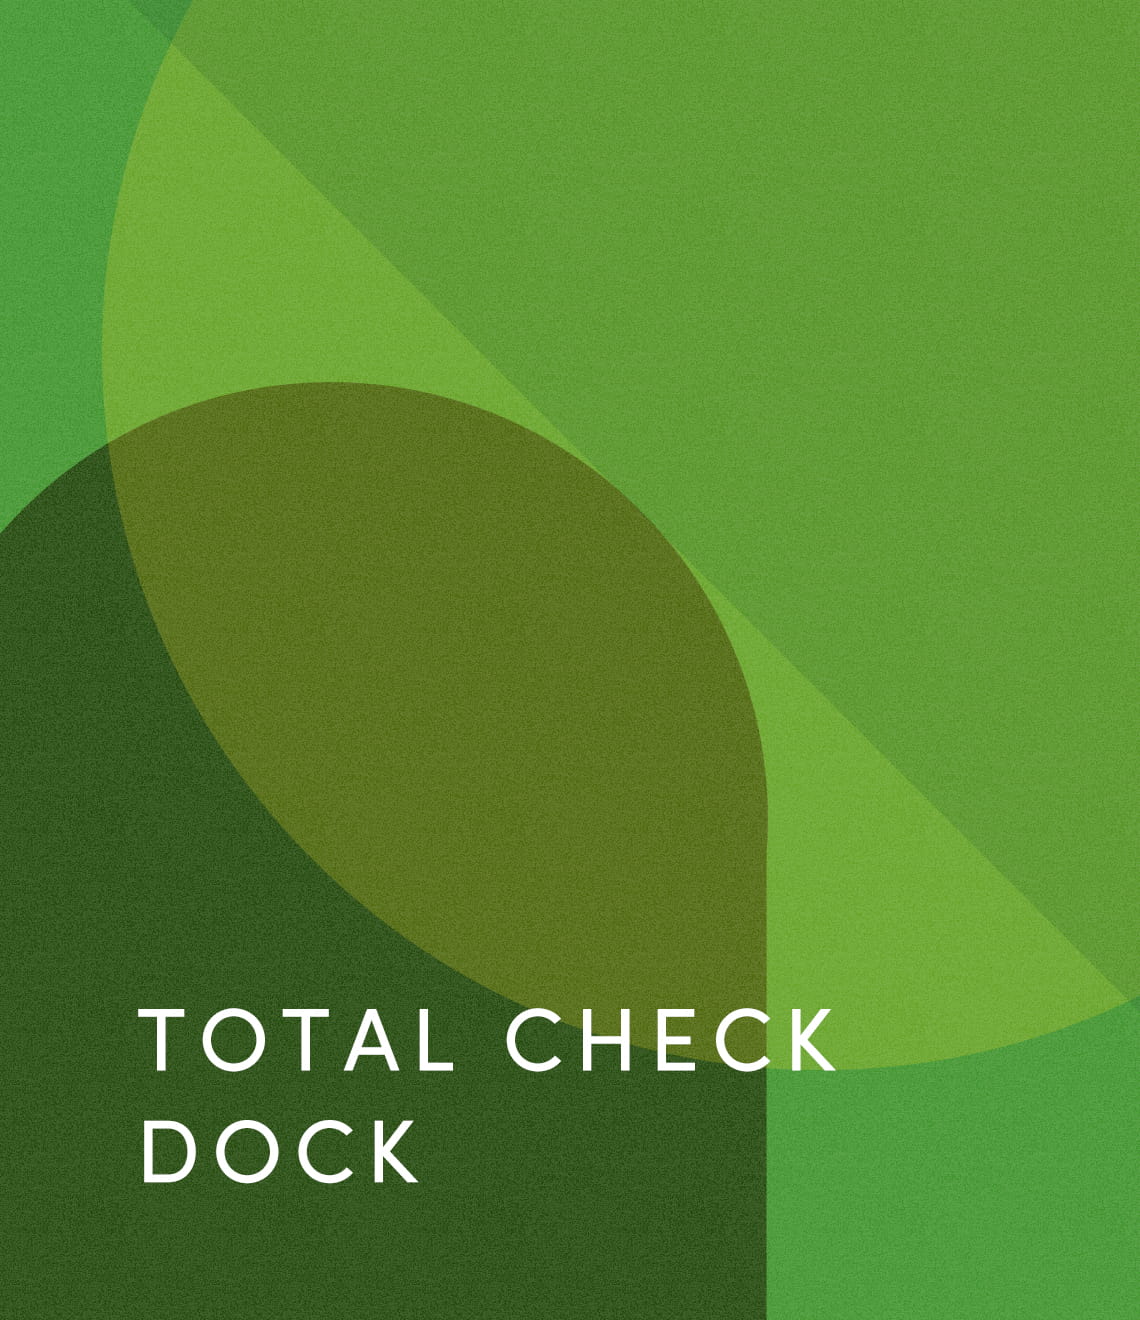 TOTAL CHECK DOCK